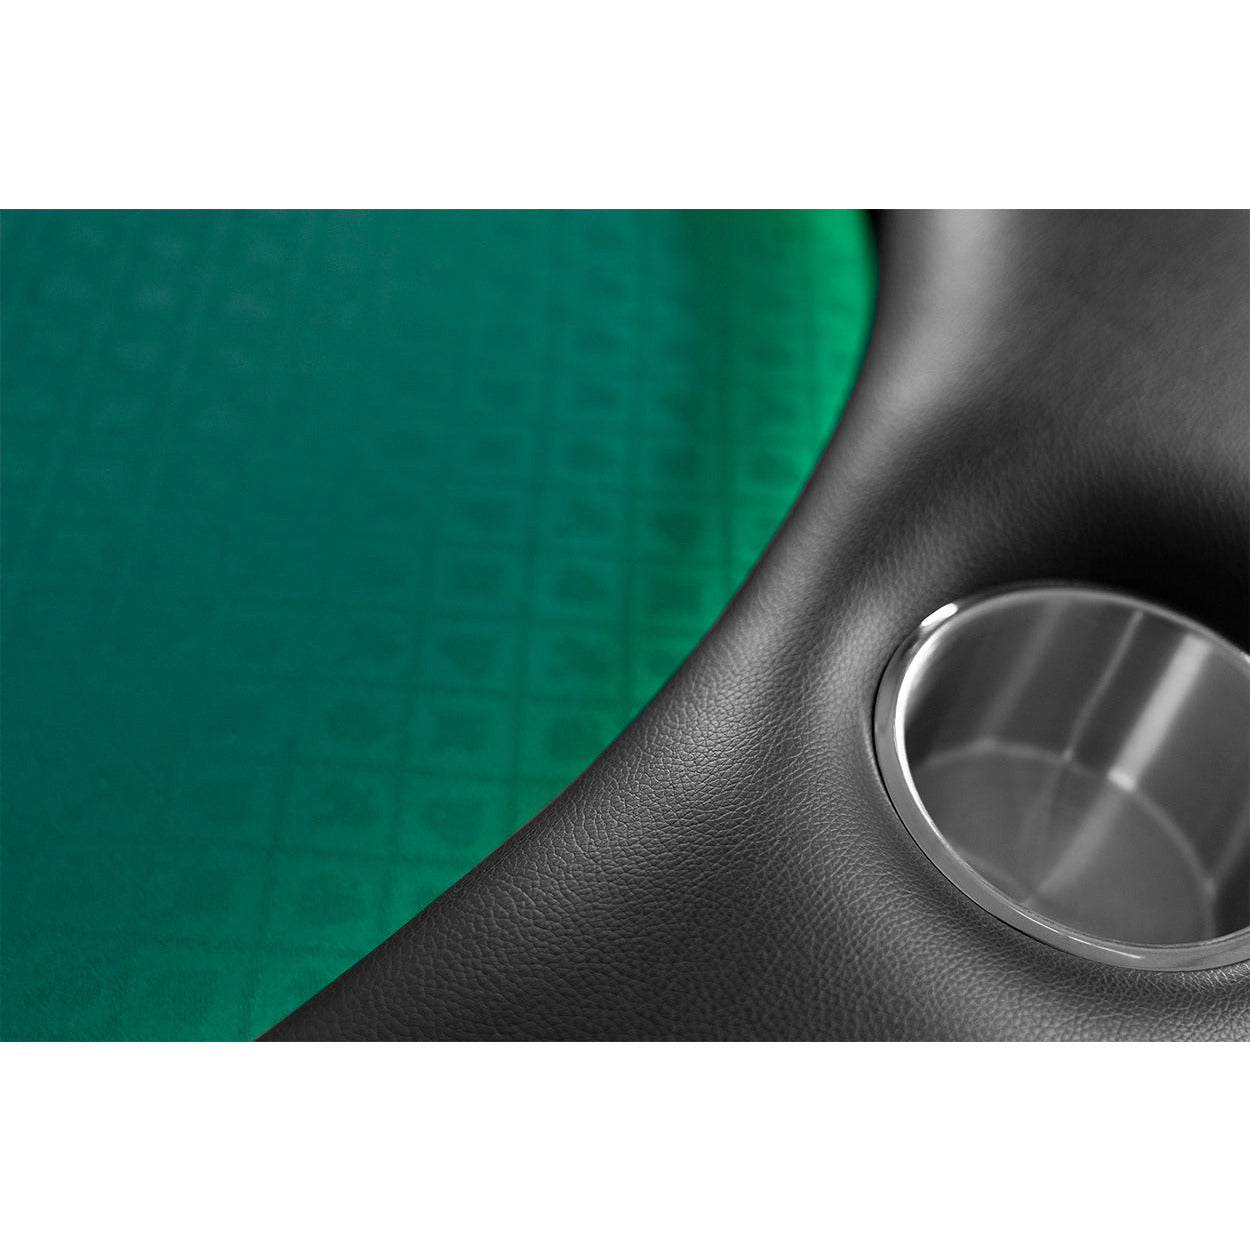 BBO The Aces Pro Alpha Folding Poker Table green speedcloth close up of cupholder